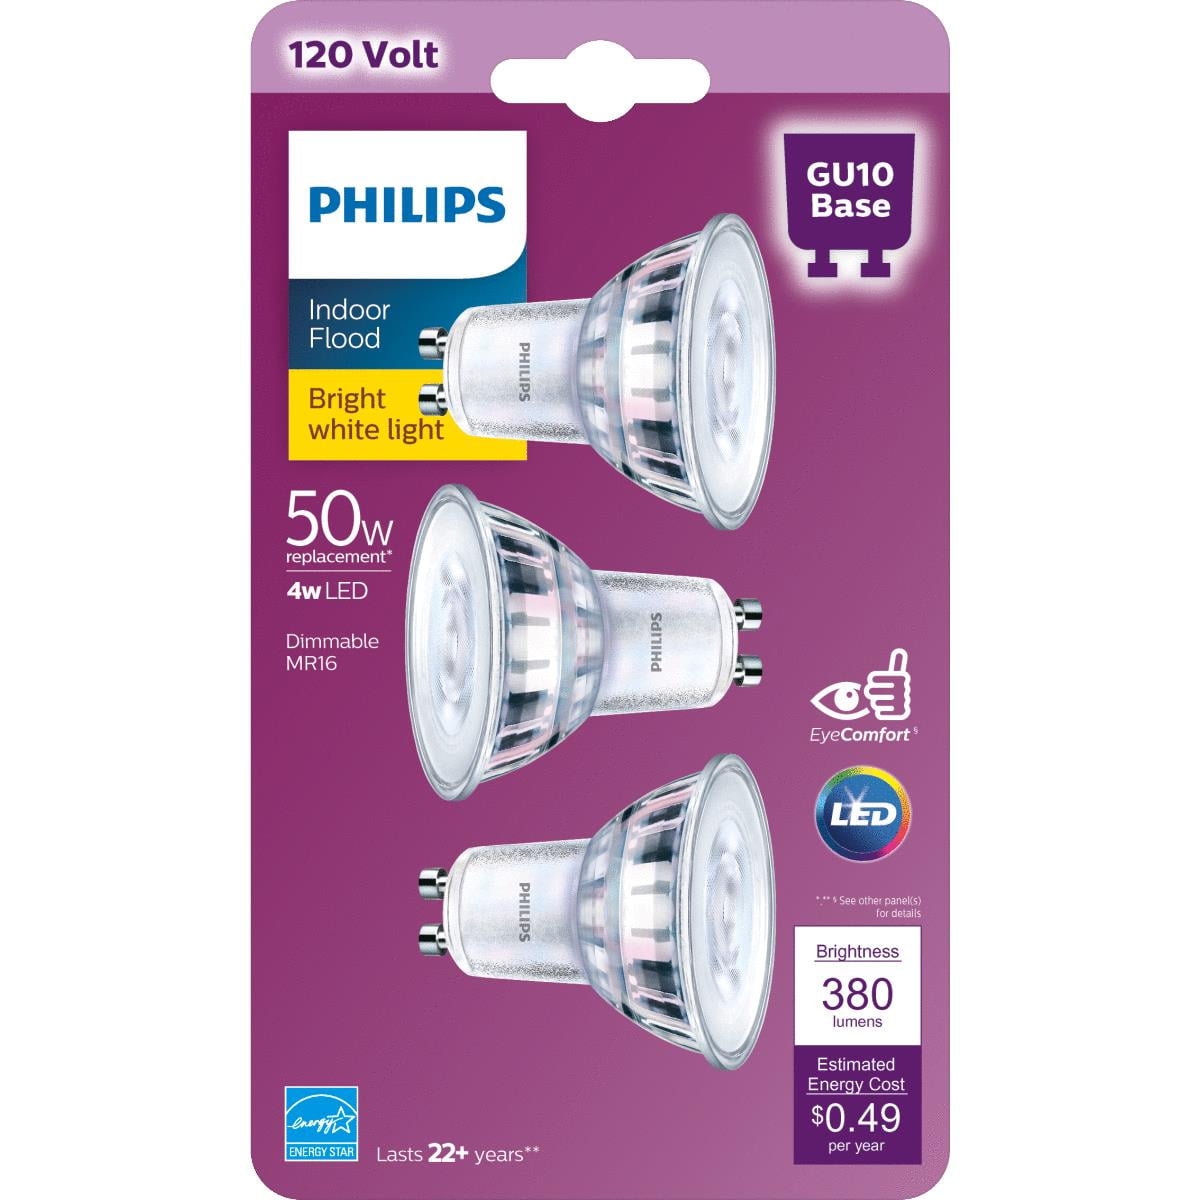 Philips LED GU10 Light Bulbs 4.6W 50W Warm White Non Dimmable Pack of 6 